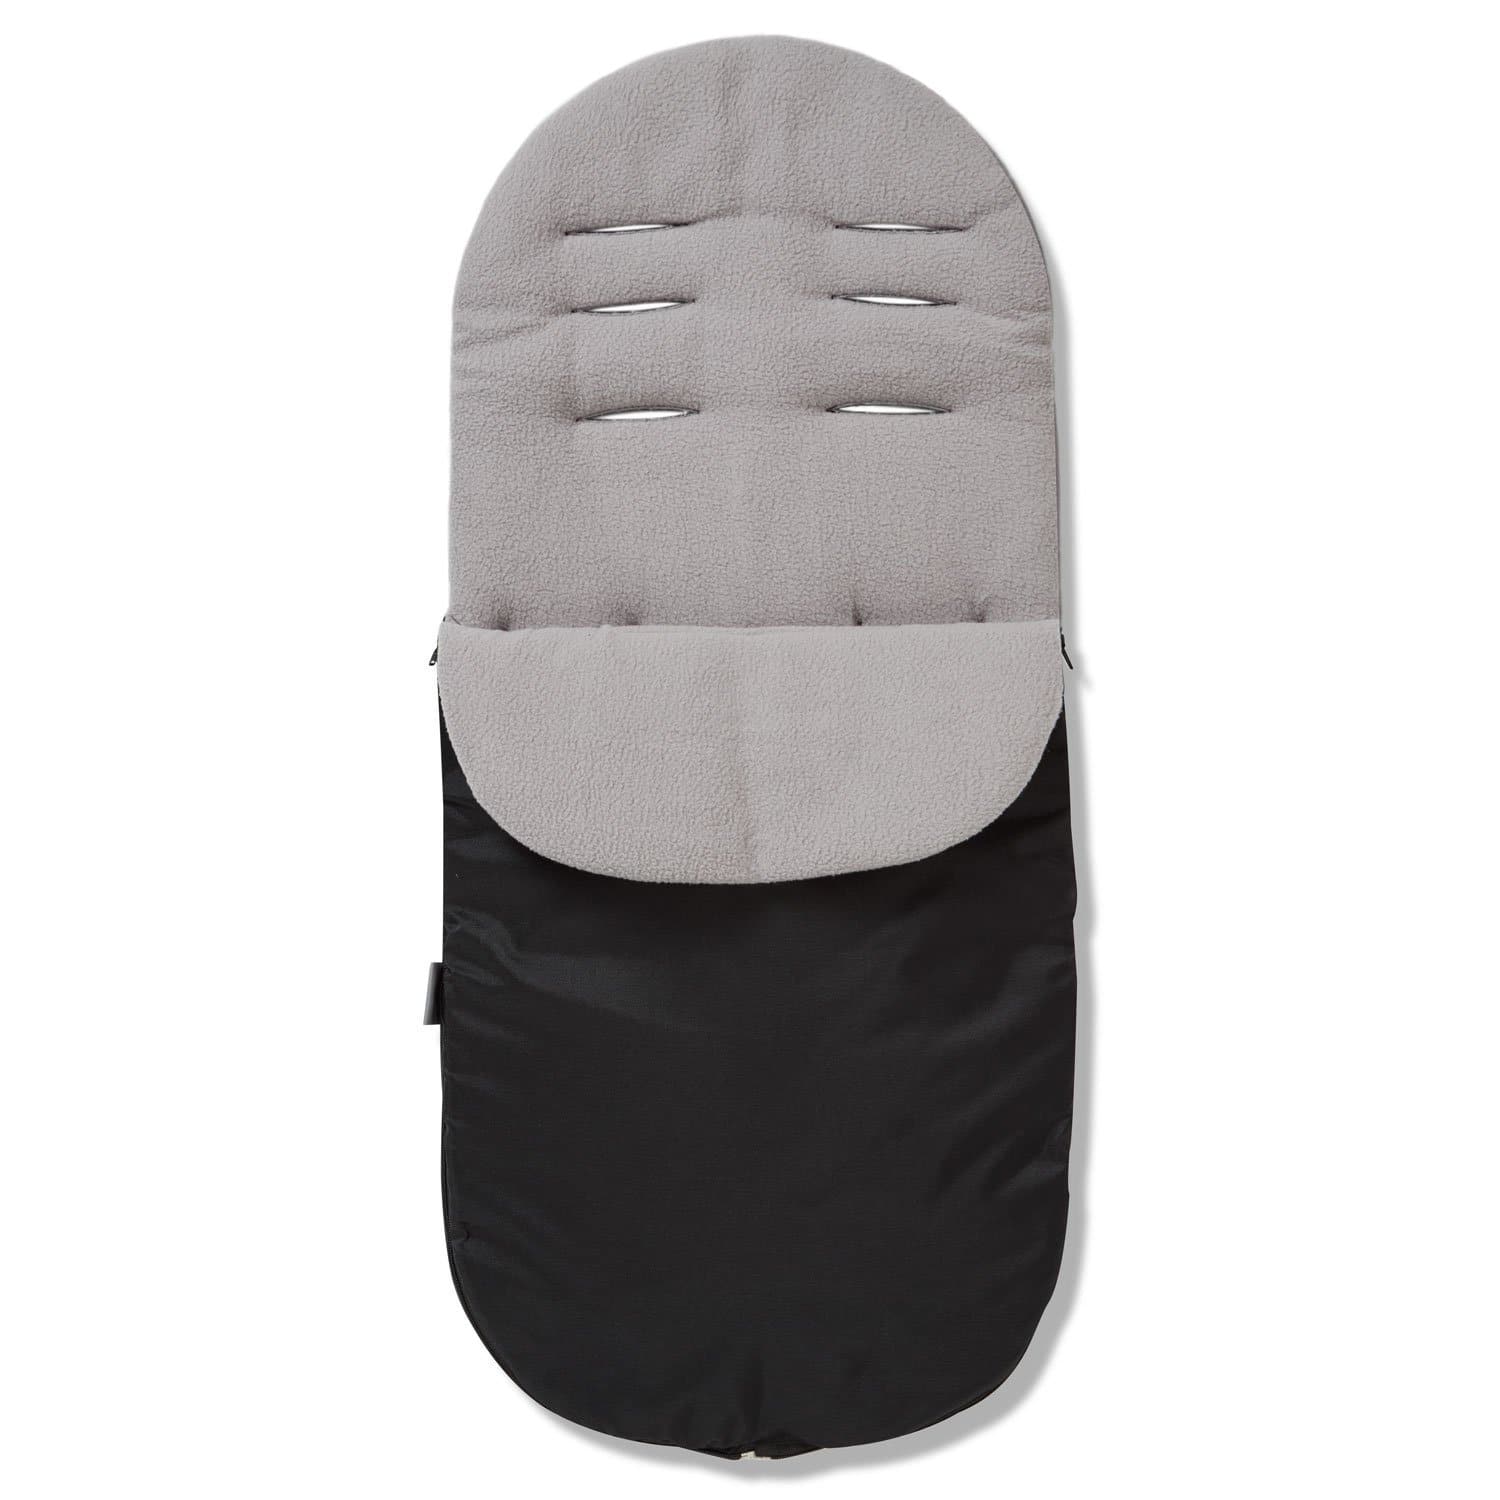 Footmuff / Cosy Toes Compatible with BabyDan - Grey / Fits All Models | For Your Little One